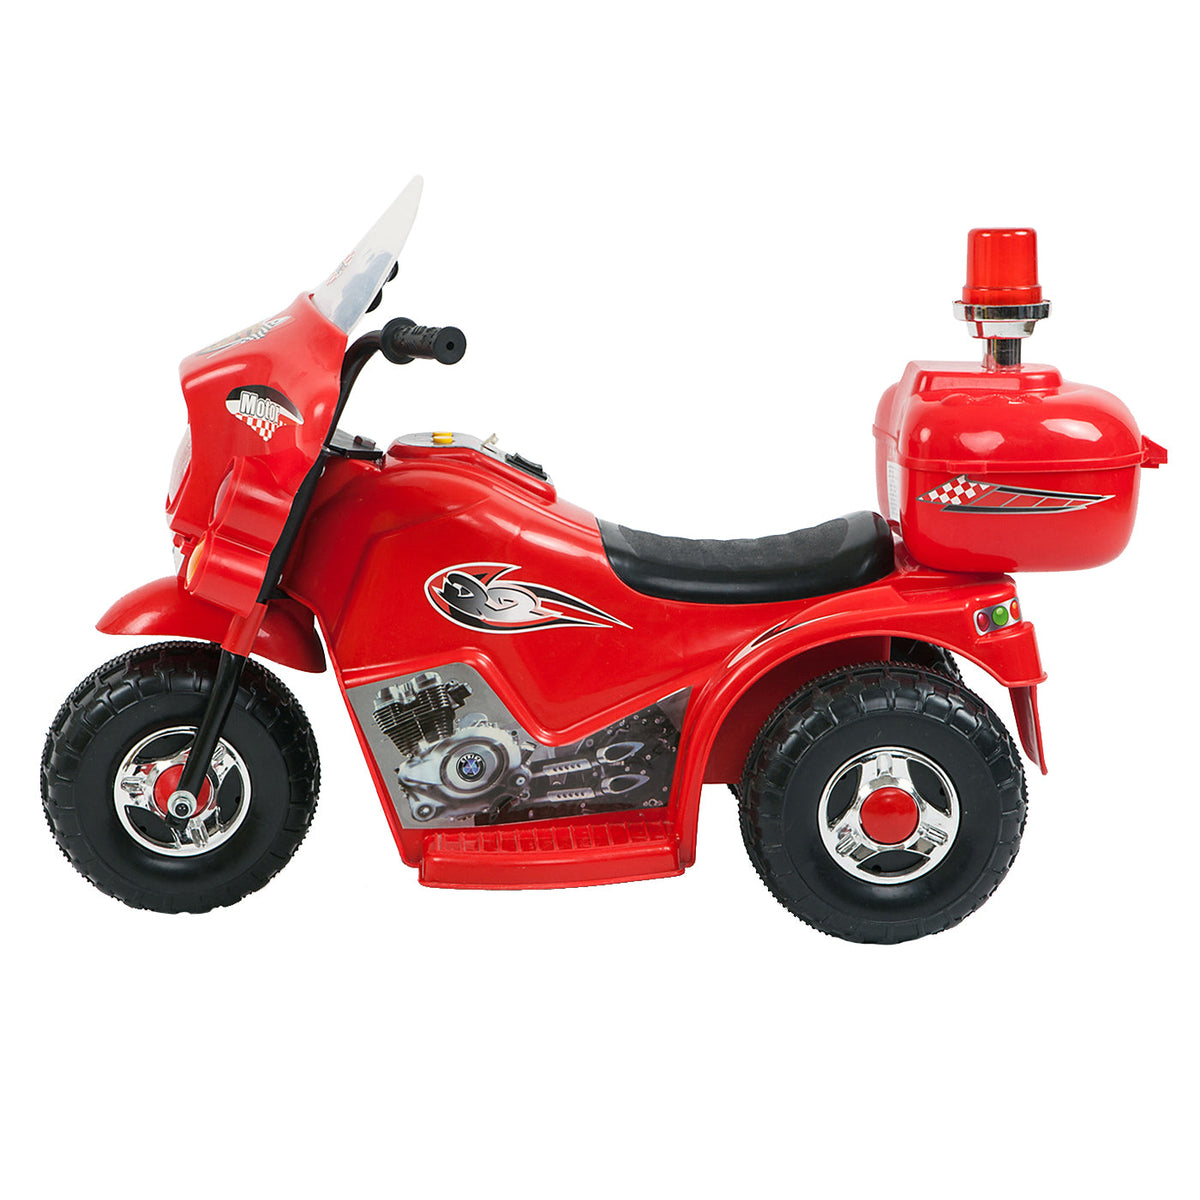 Side view of the Children's Electric Ride-on Motorcycle.